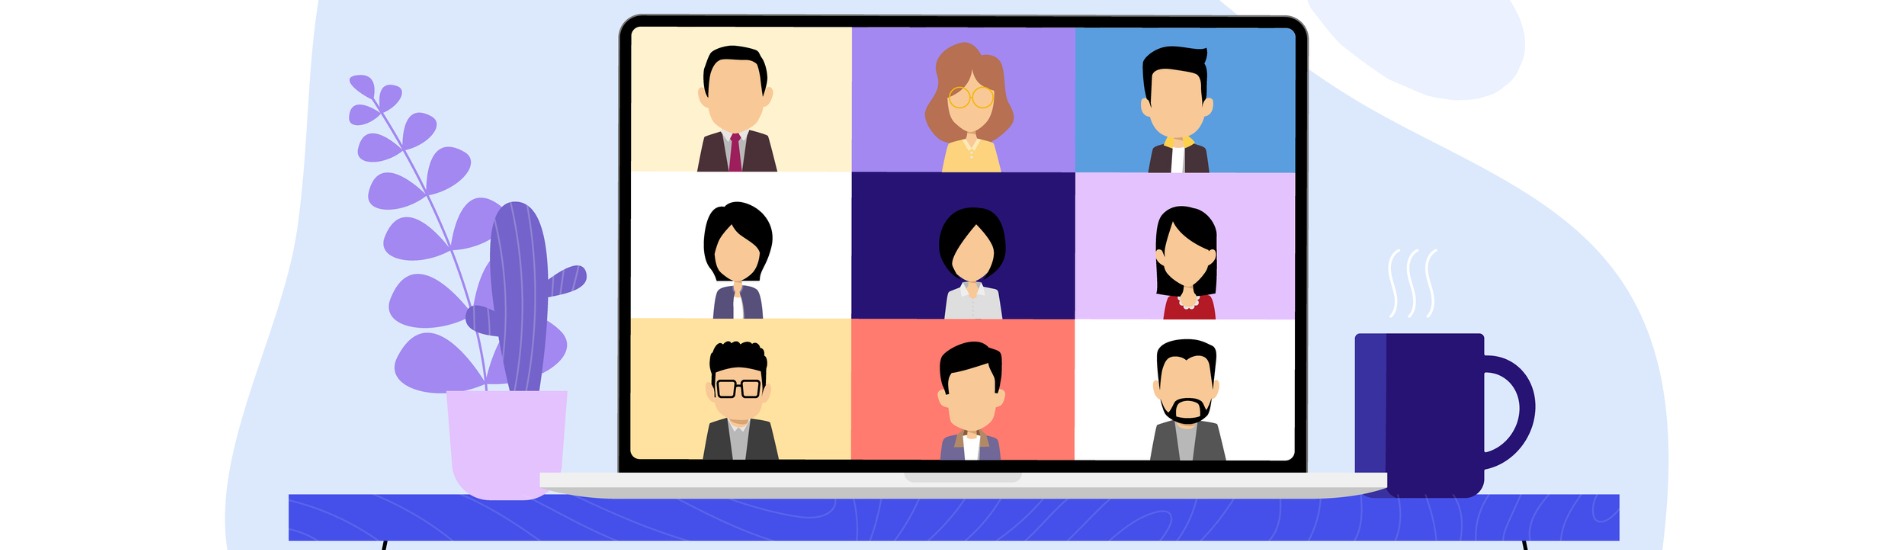 video-conference-people-group-on-computer-screen-taking-with- 1900 x 550